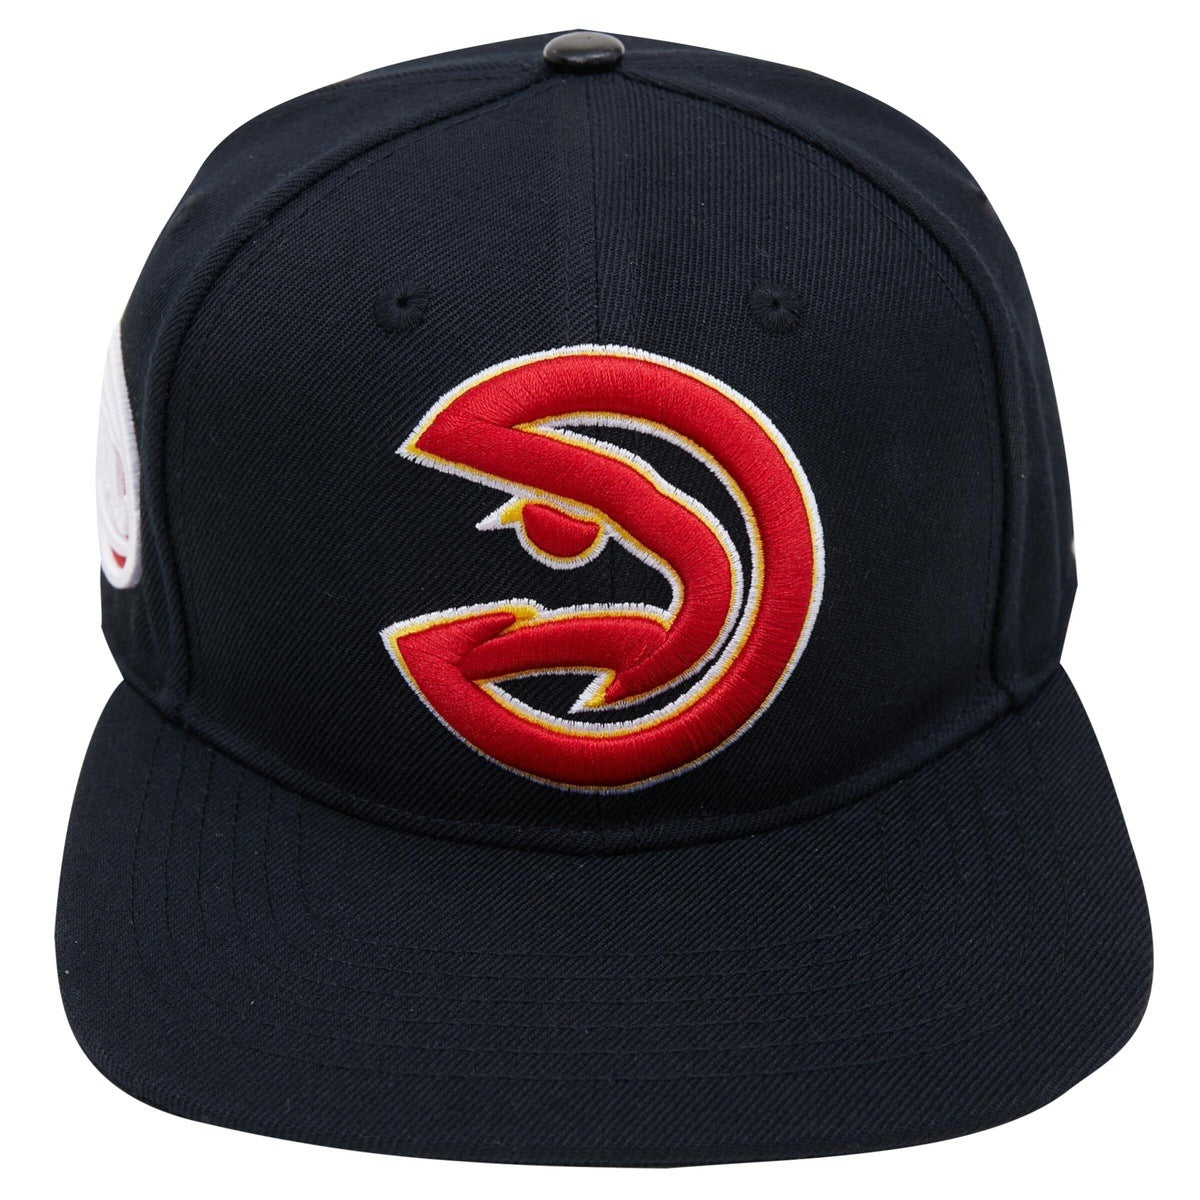 Men's Calgary Flames Pro Standard White/Red Two-Tone Classic Snapback Hat